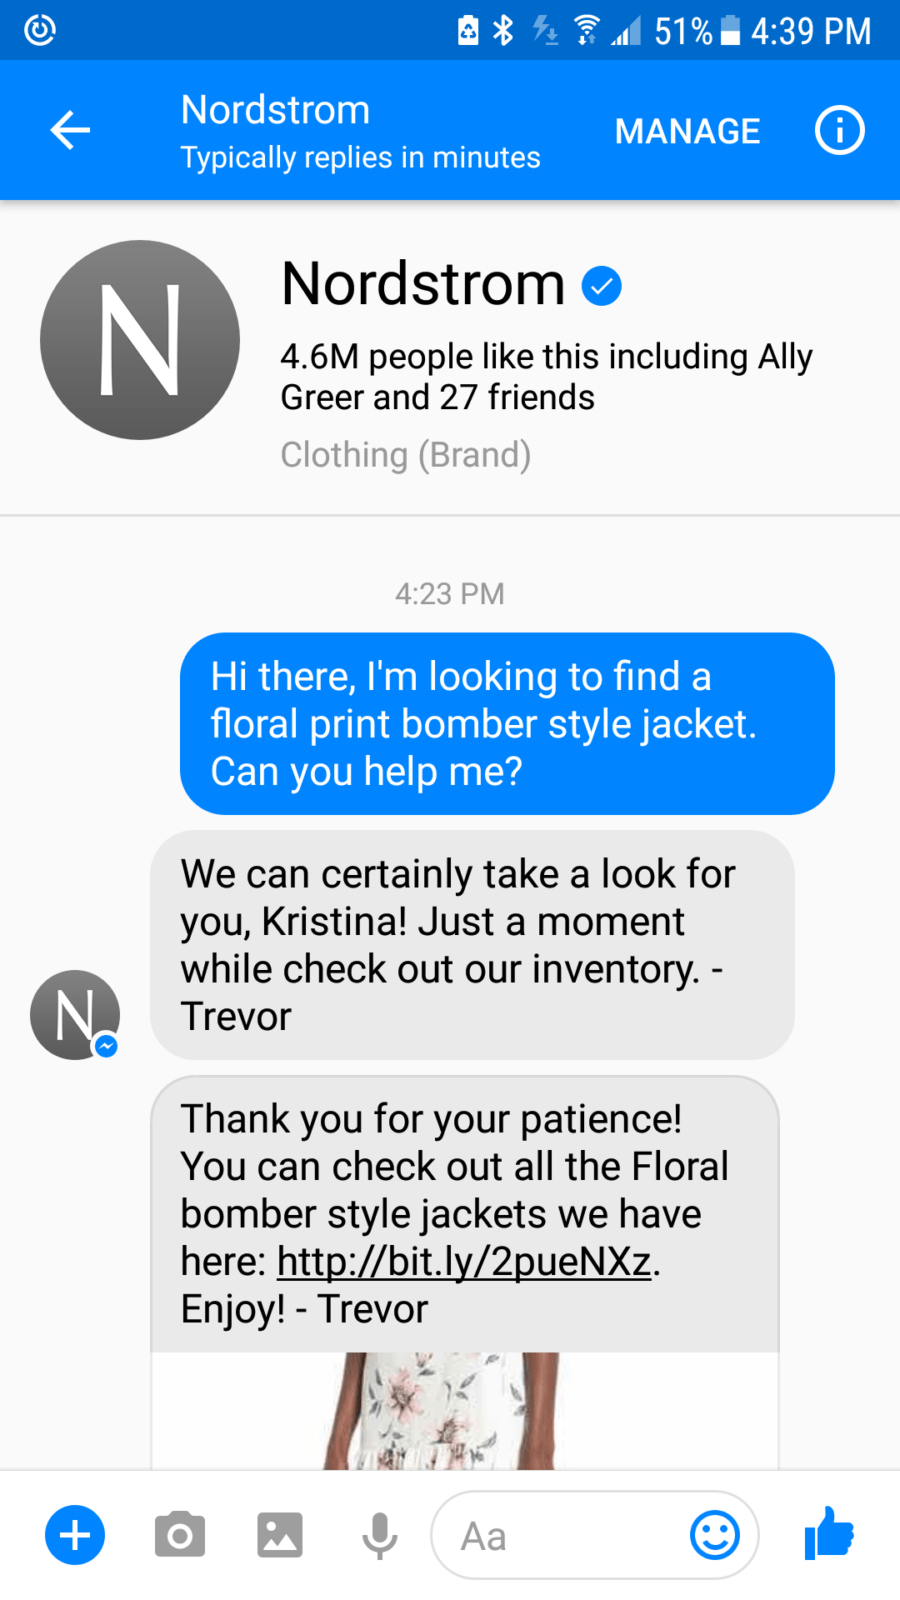 Nordstrom live chat Contact Us